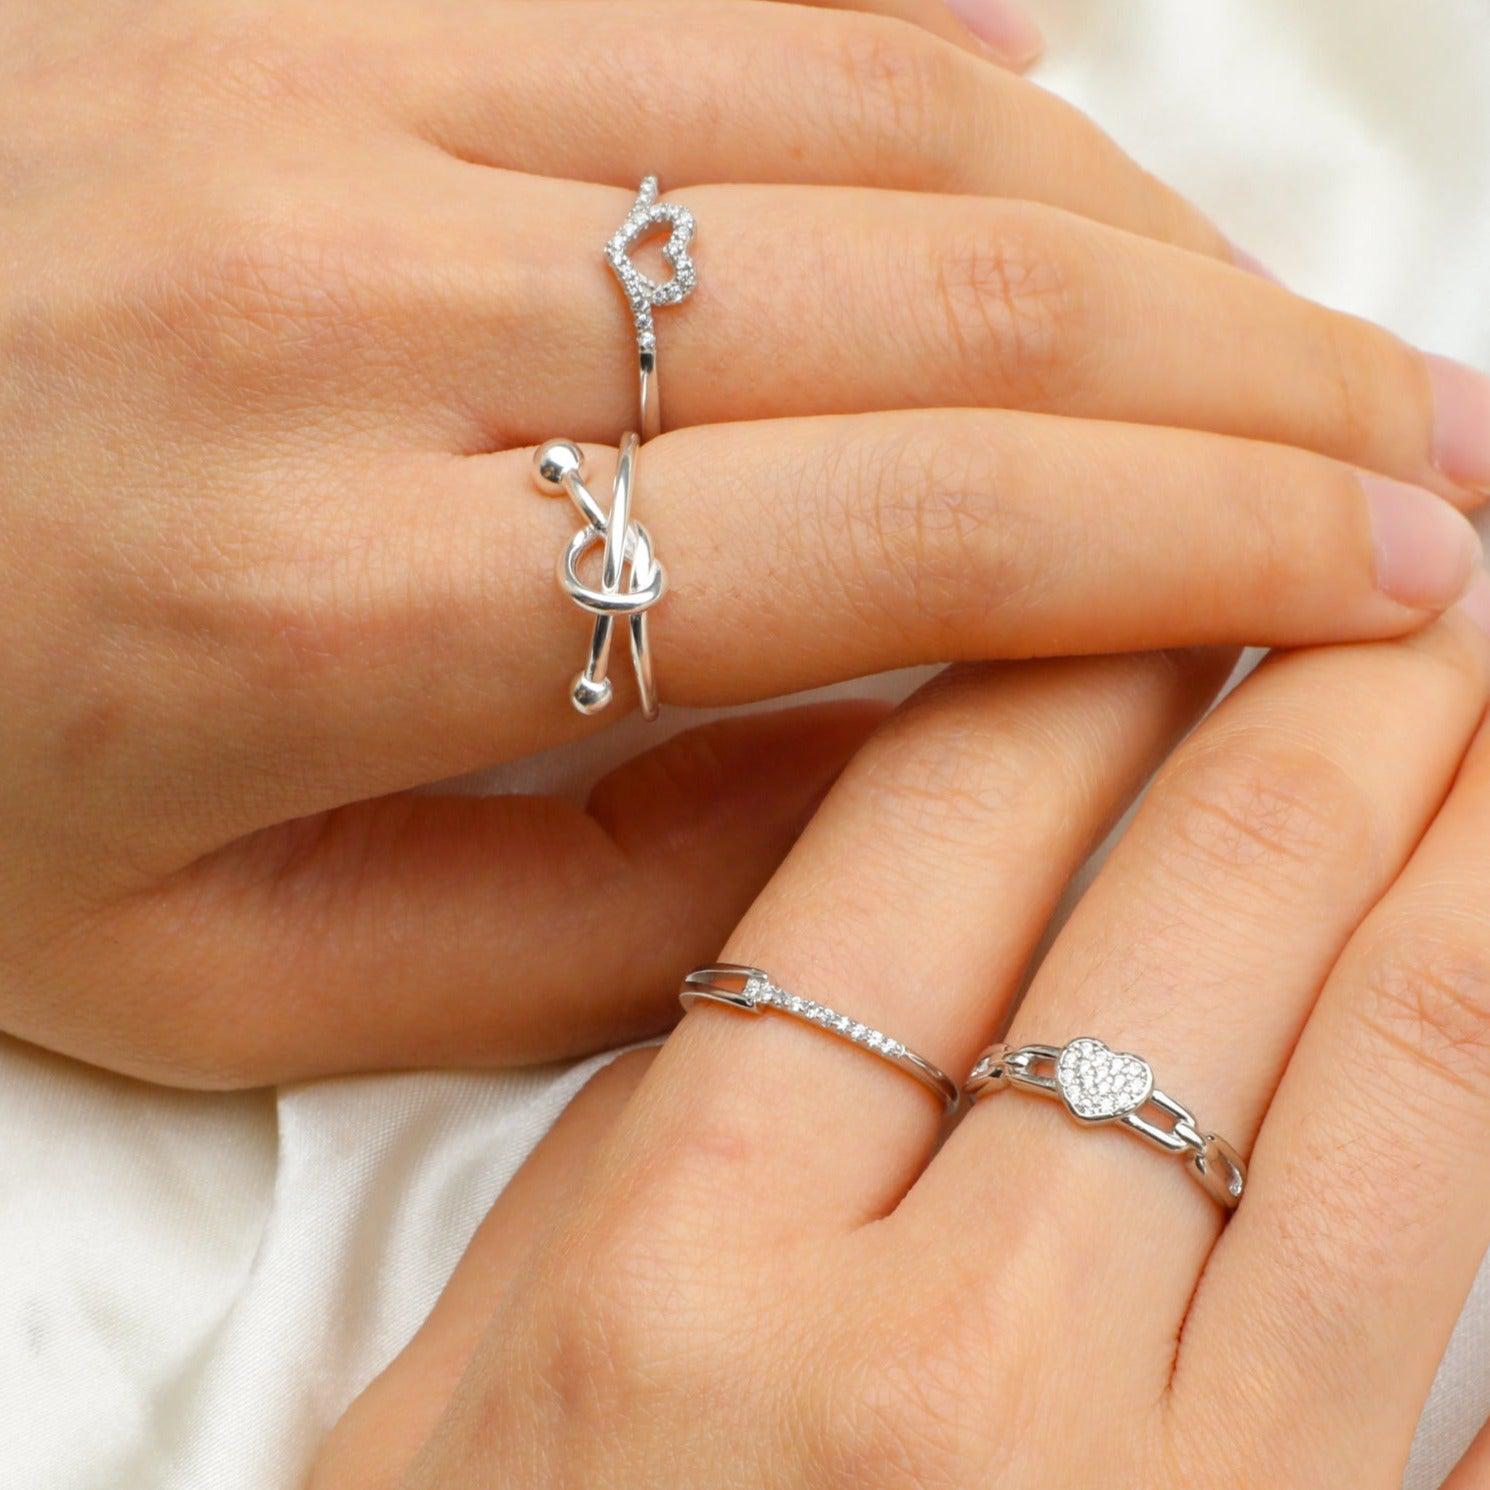 Hold My Heart Ring | Sterling Silver Rings for Her | Waterproof